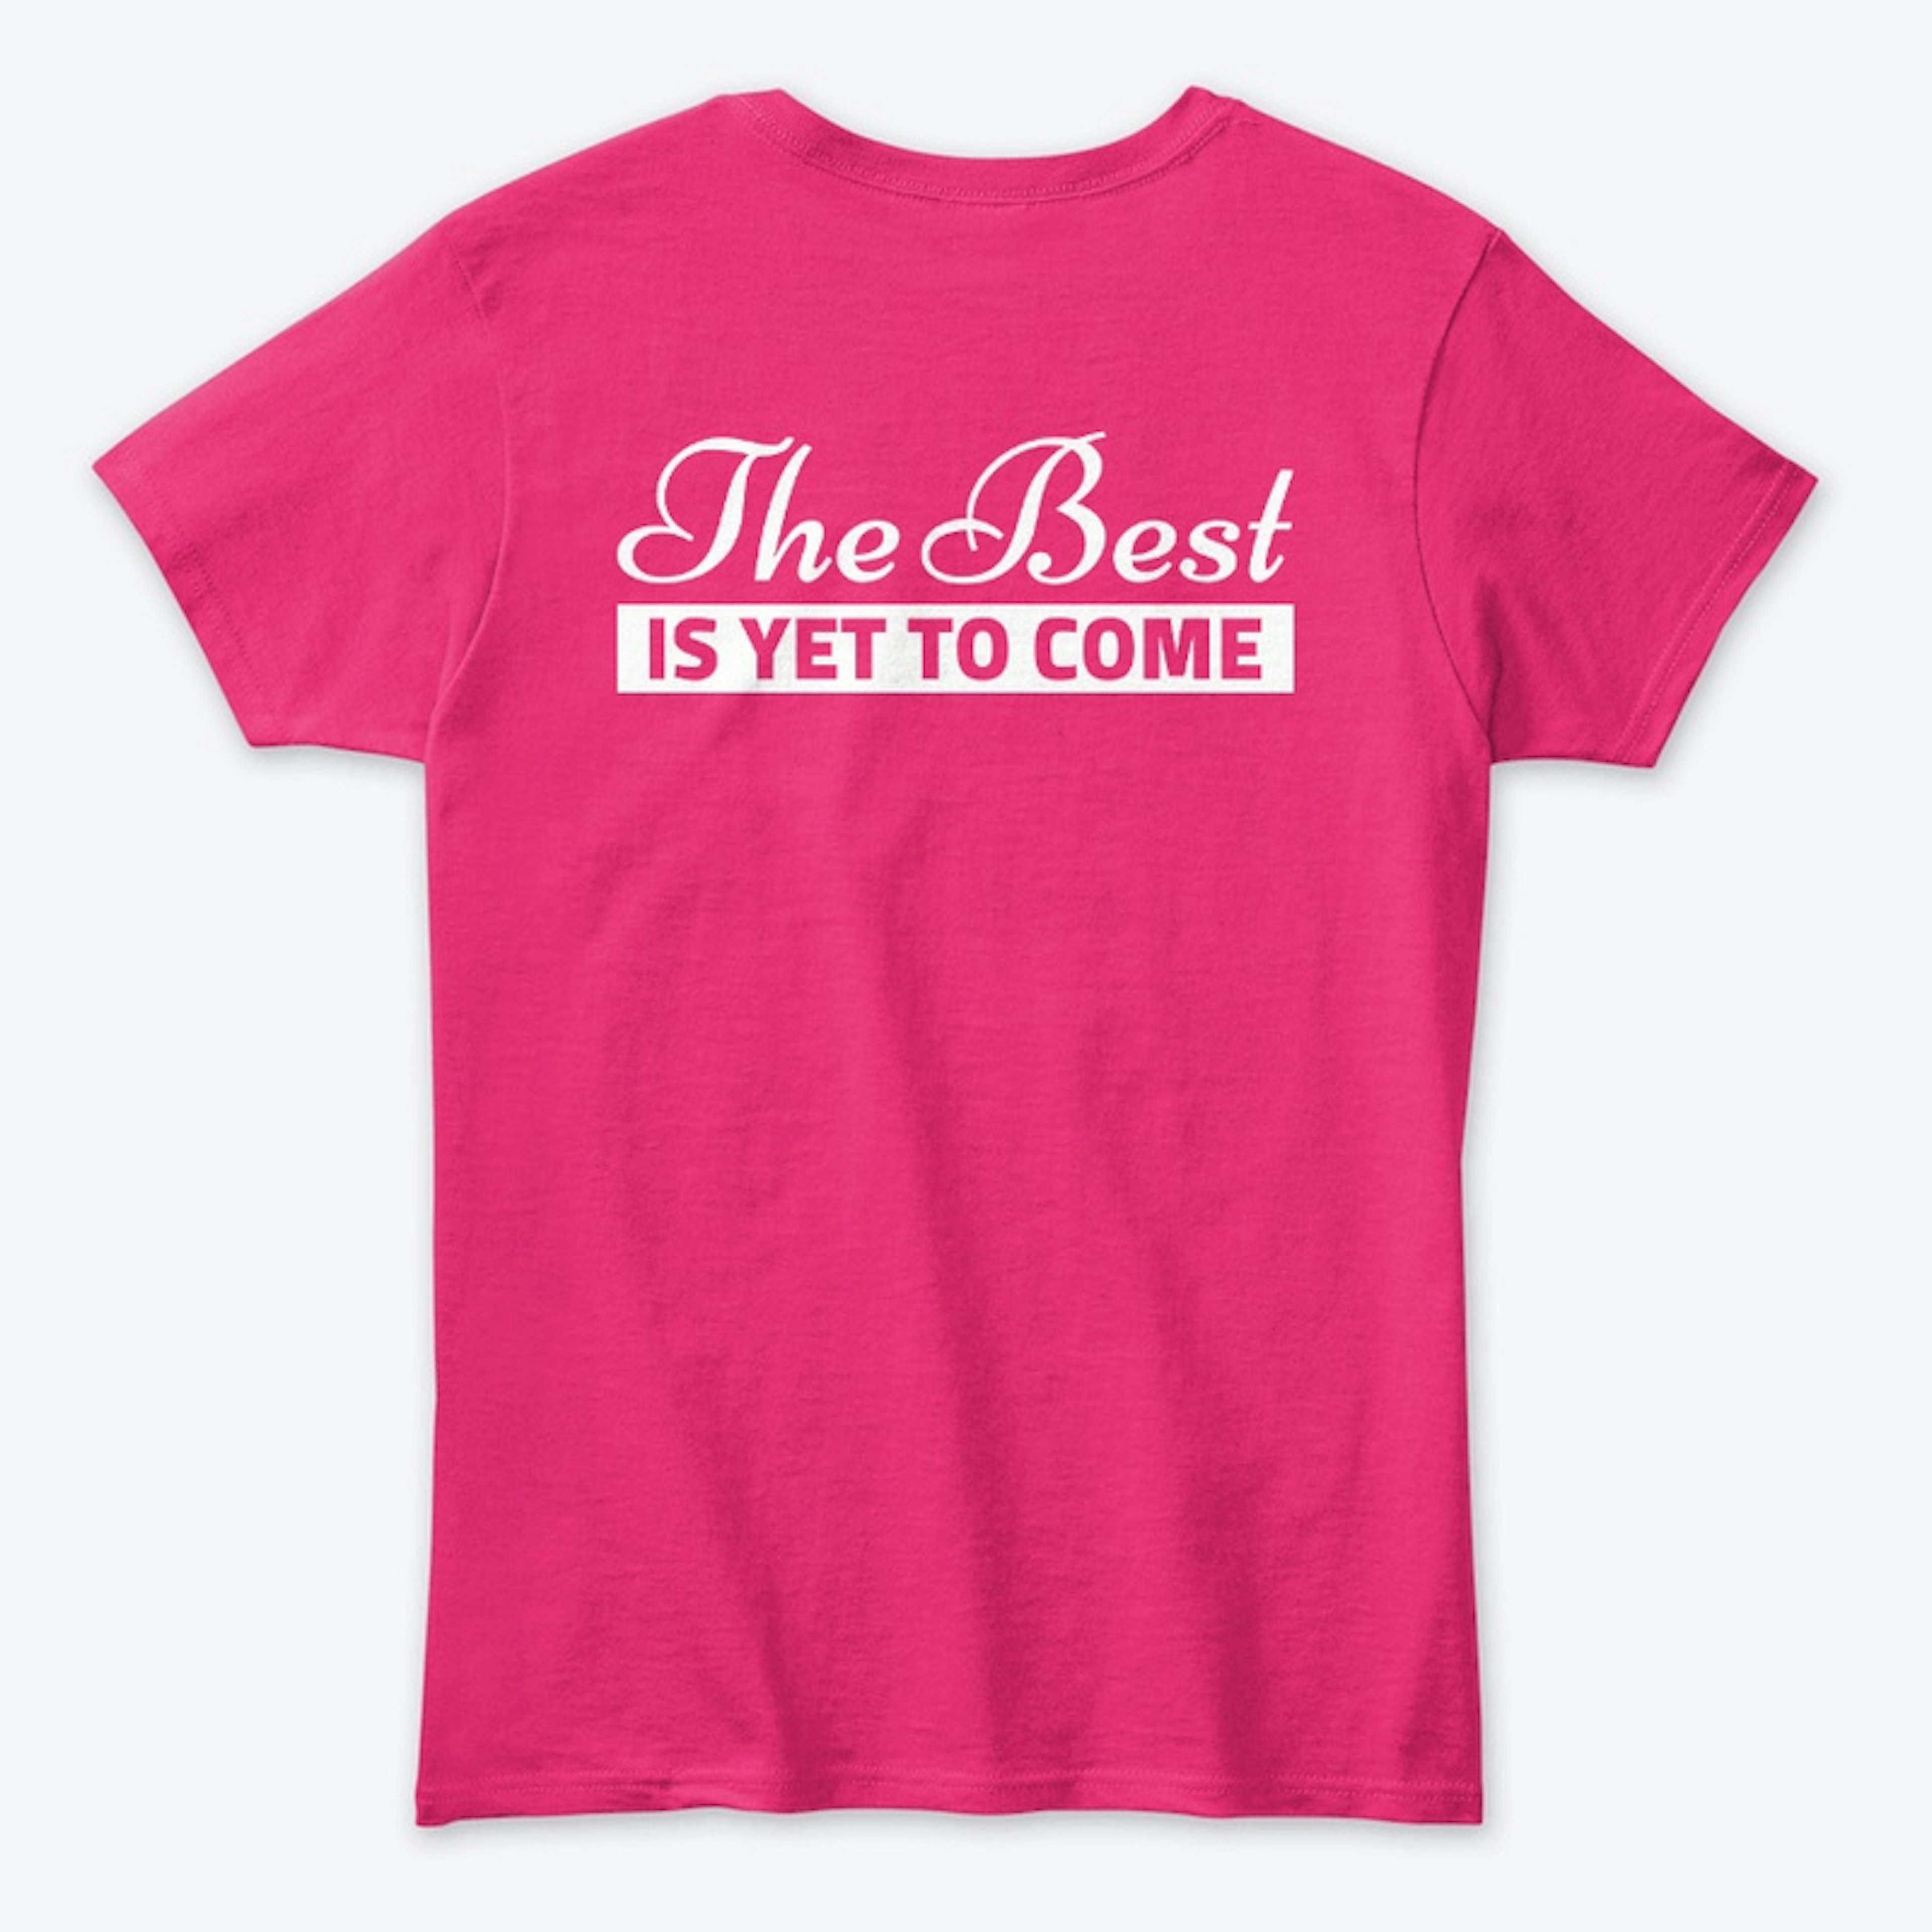 THE BEST IS YET TO COME Women's Classic 